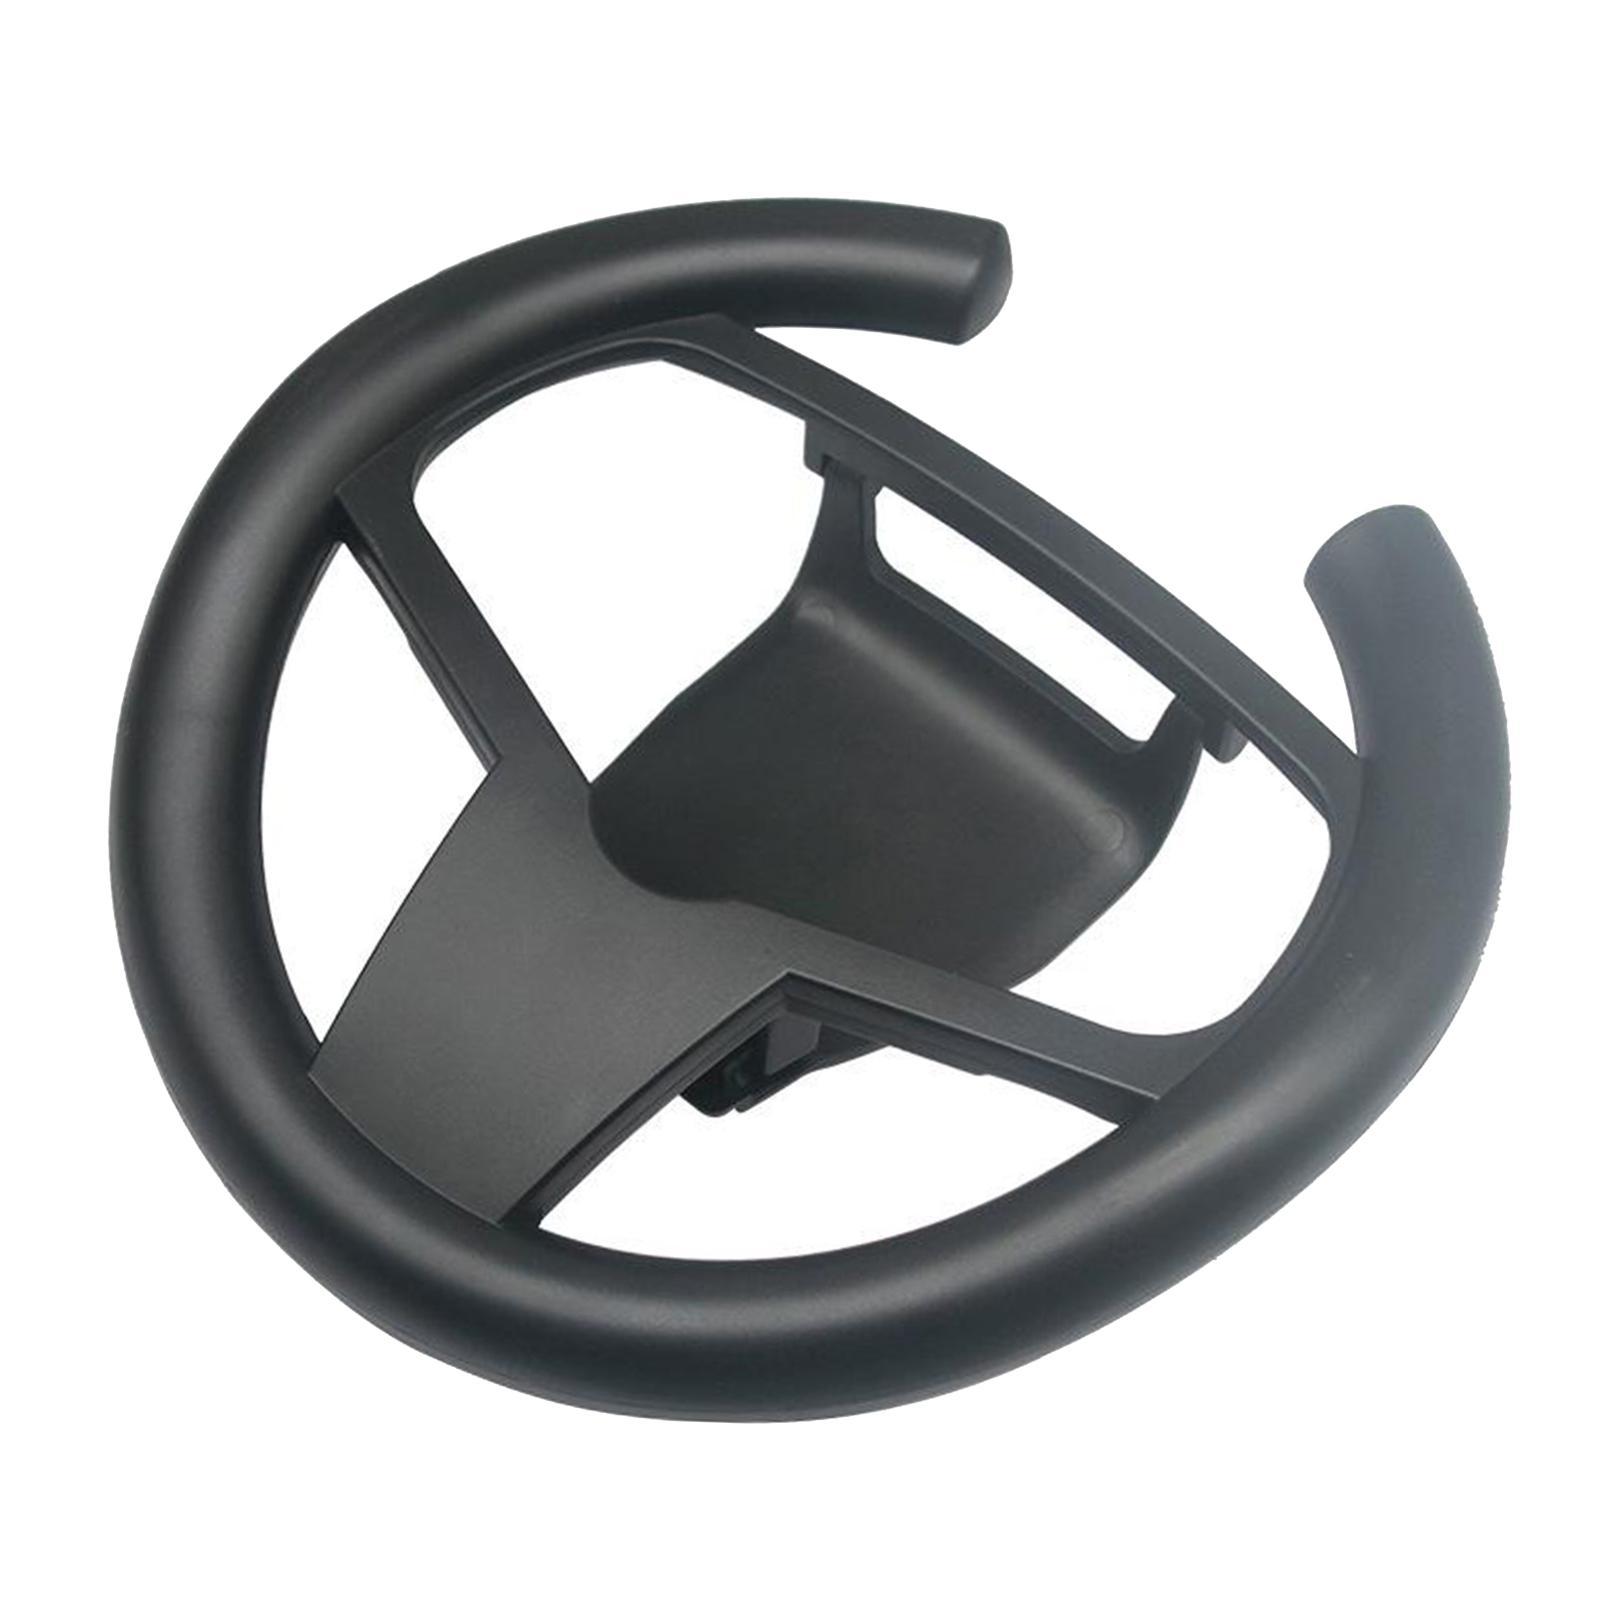 Black Steering Wheel Racing Game Driving Handle For PS5 Gaming Accessories